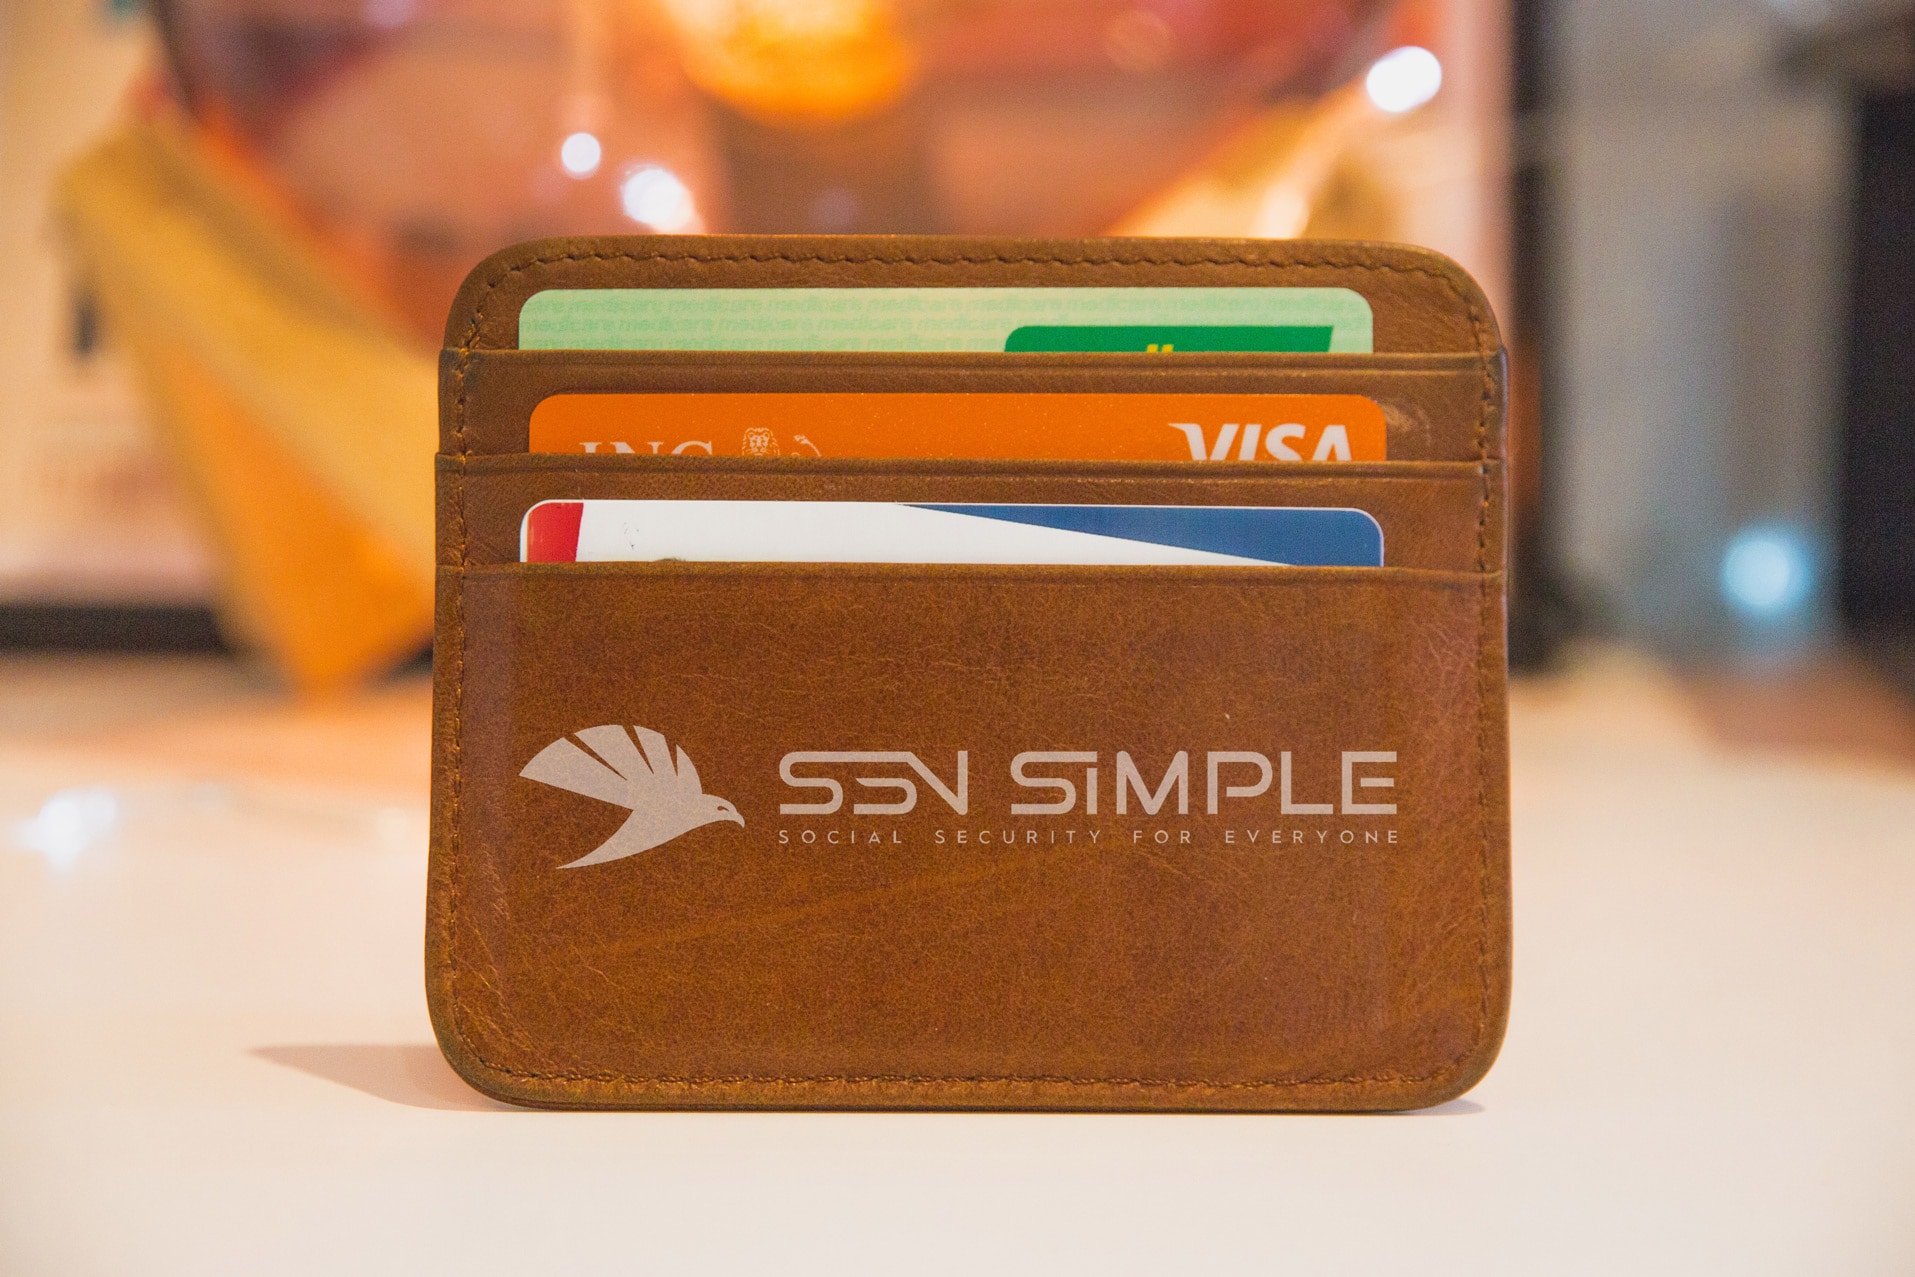 Can I Apply For A Credit Card Without An SSN?